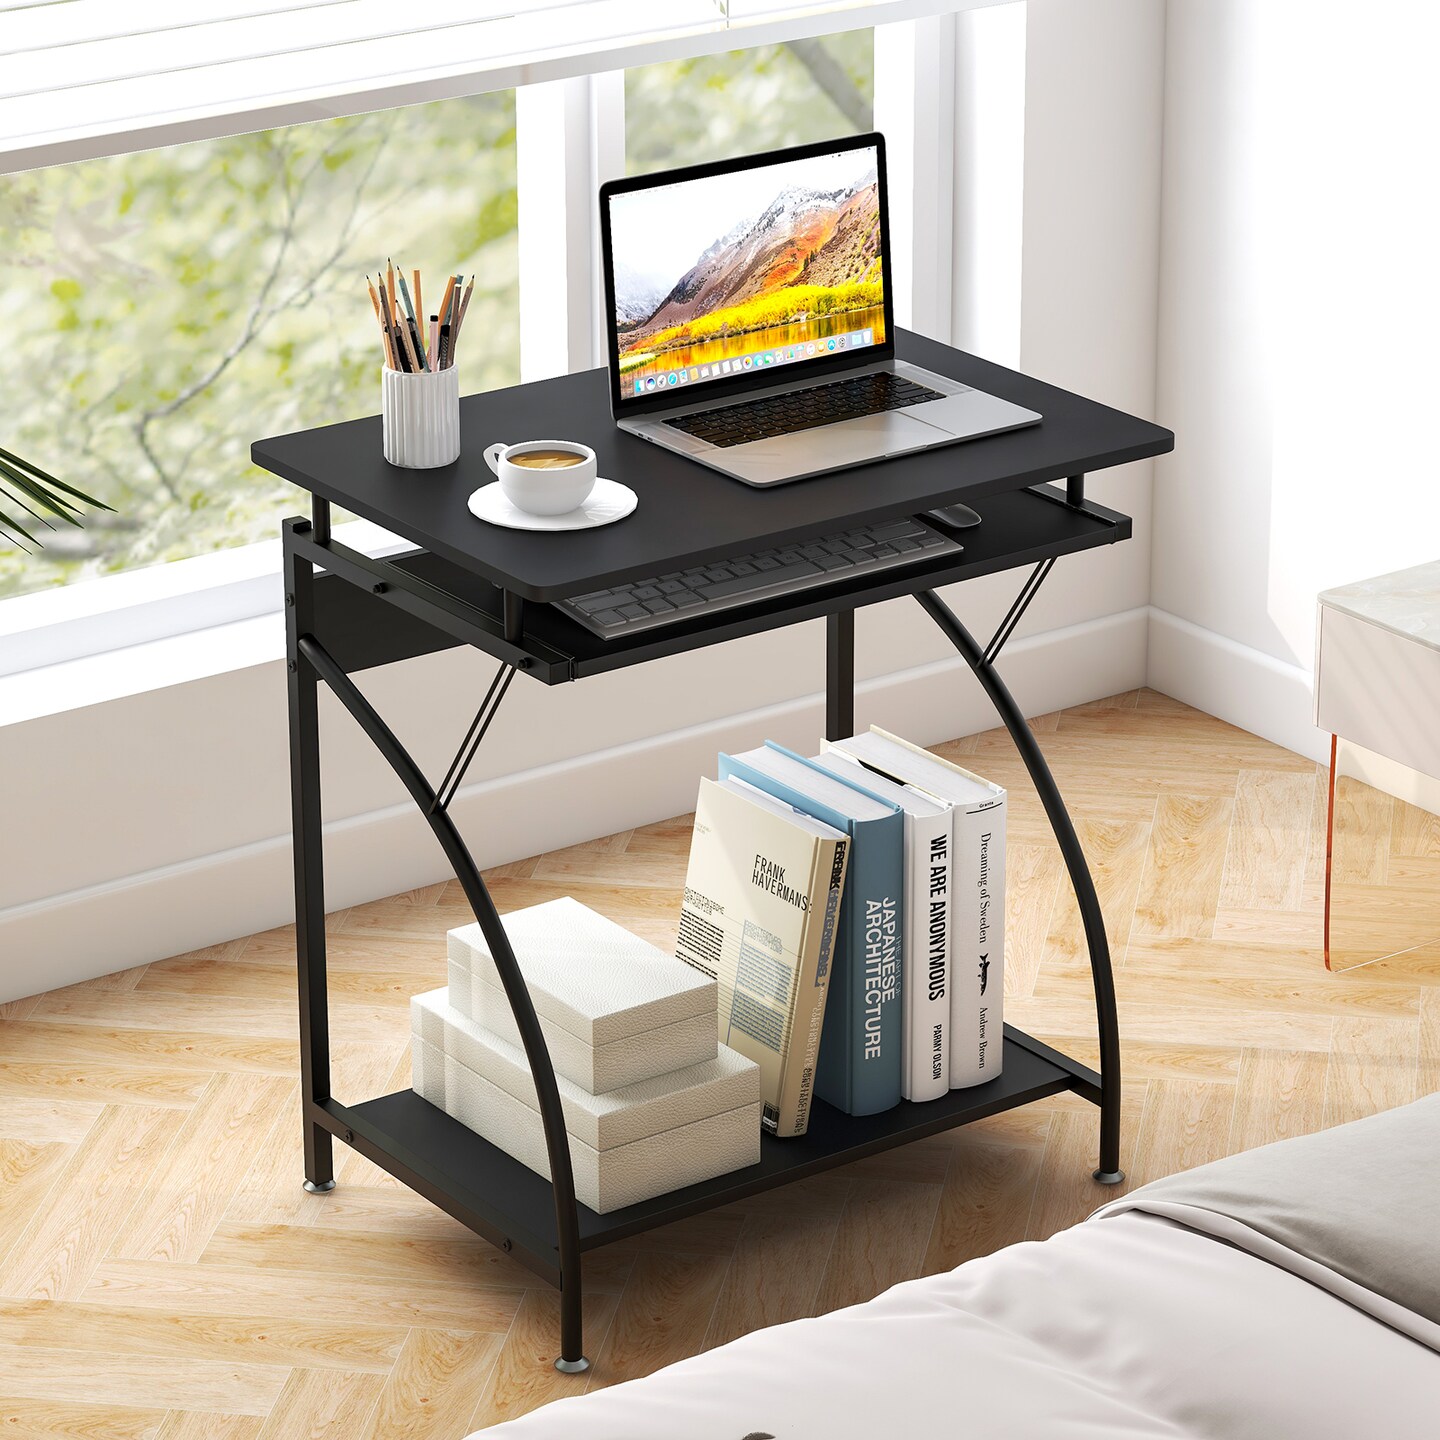 27.5 Inch Laptop Table Computer Desk For Small Spaces With Pull-out Keyboard Tray